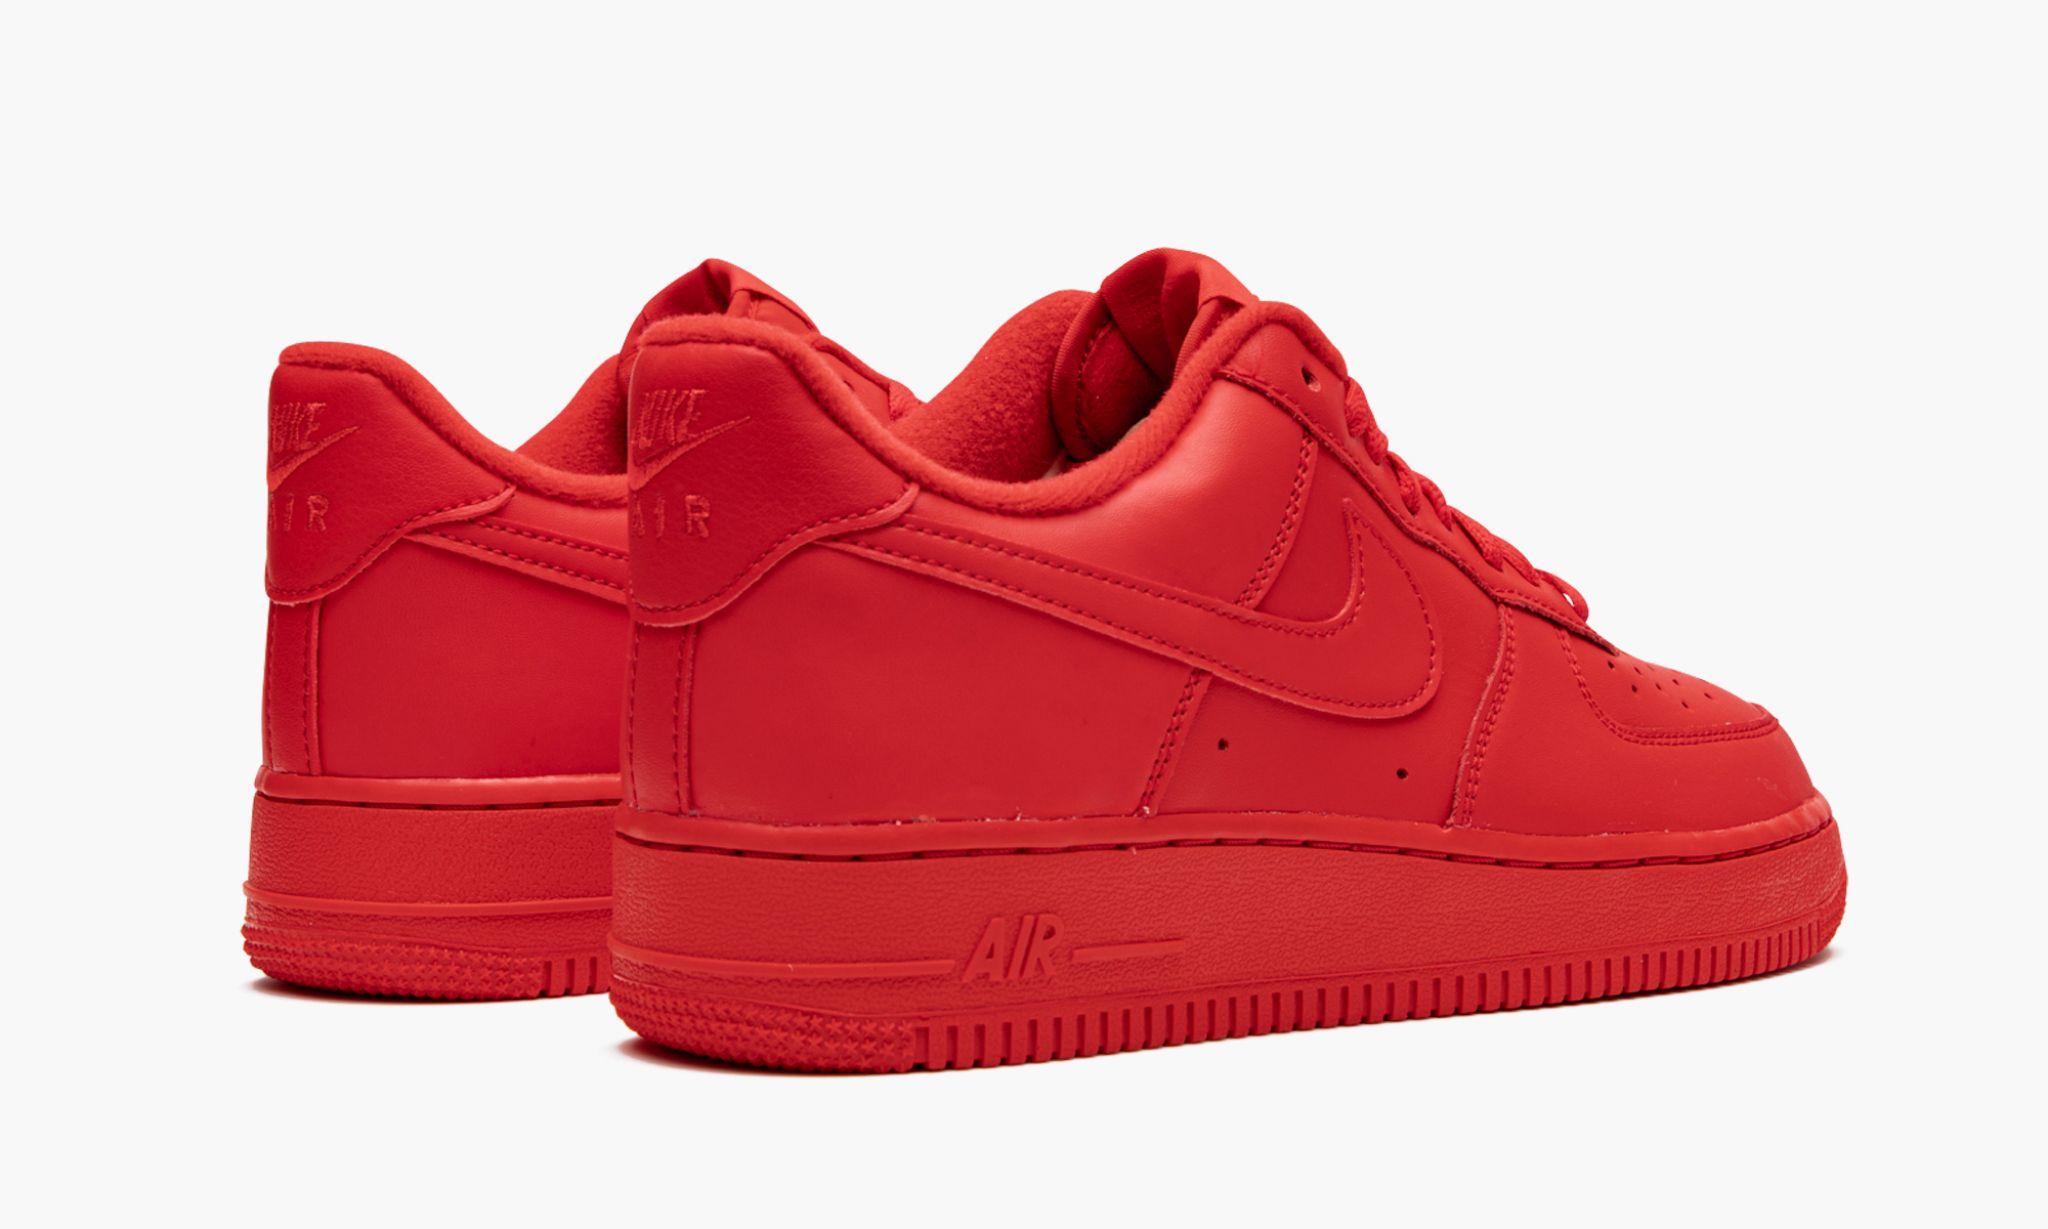 Nike Leather Air Force 1 '07 Lv8 